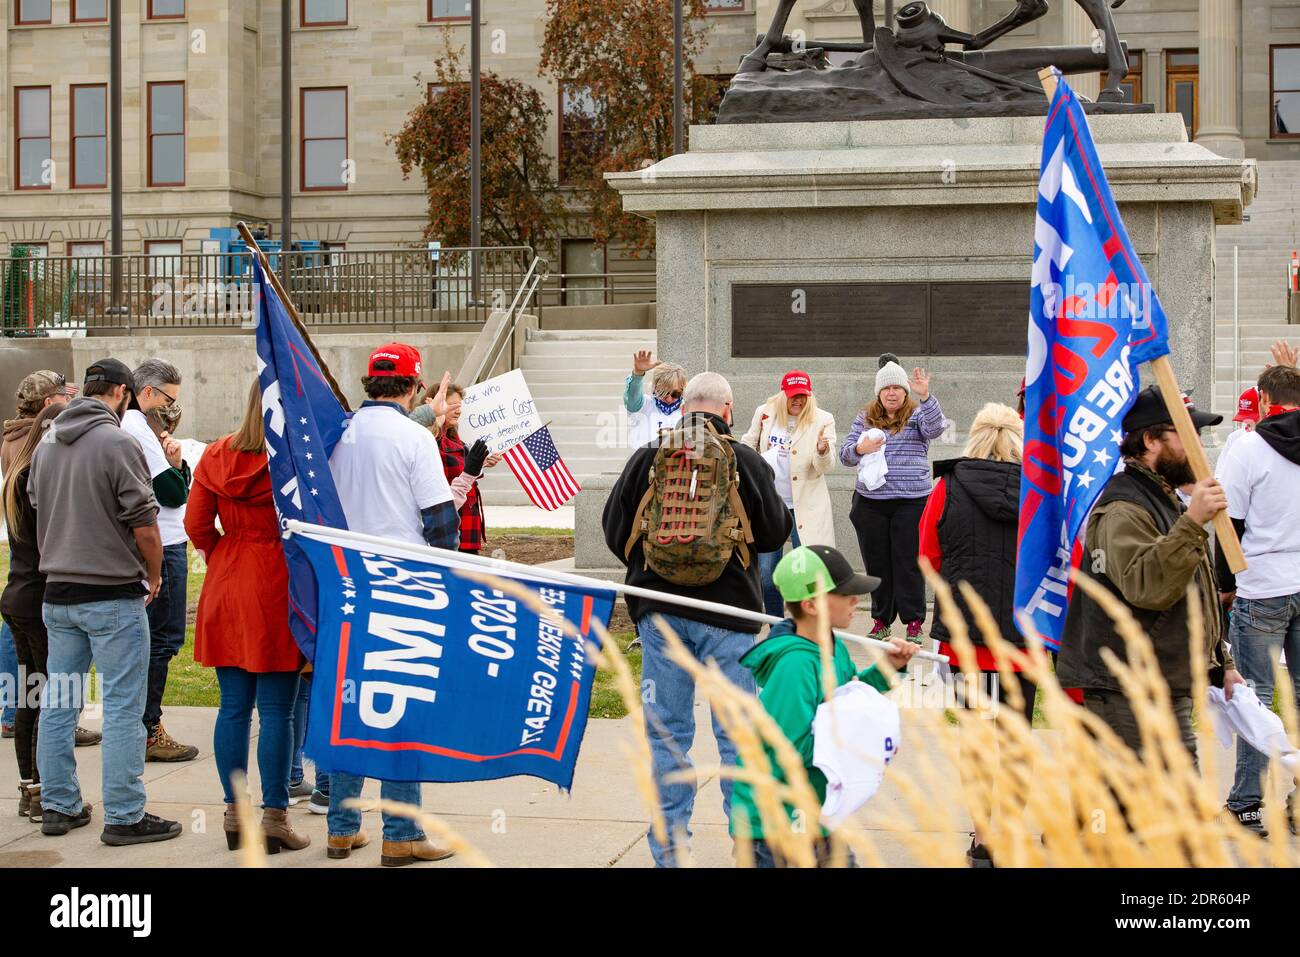 Helena, Montana / Nov 7, 2020: Protestors at Stop the Steal rally at the capitol pray and protest Joe Biden as president-elect, perceive election and Stock Photo